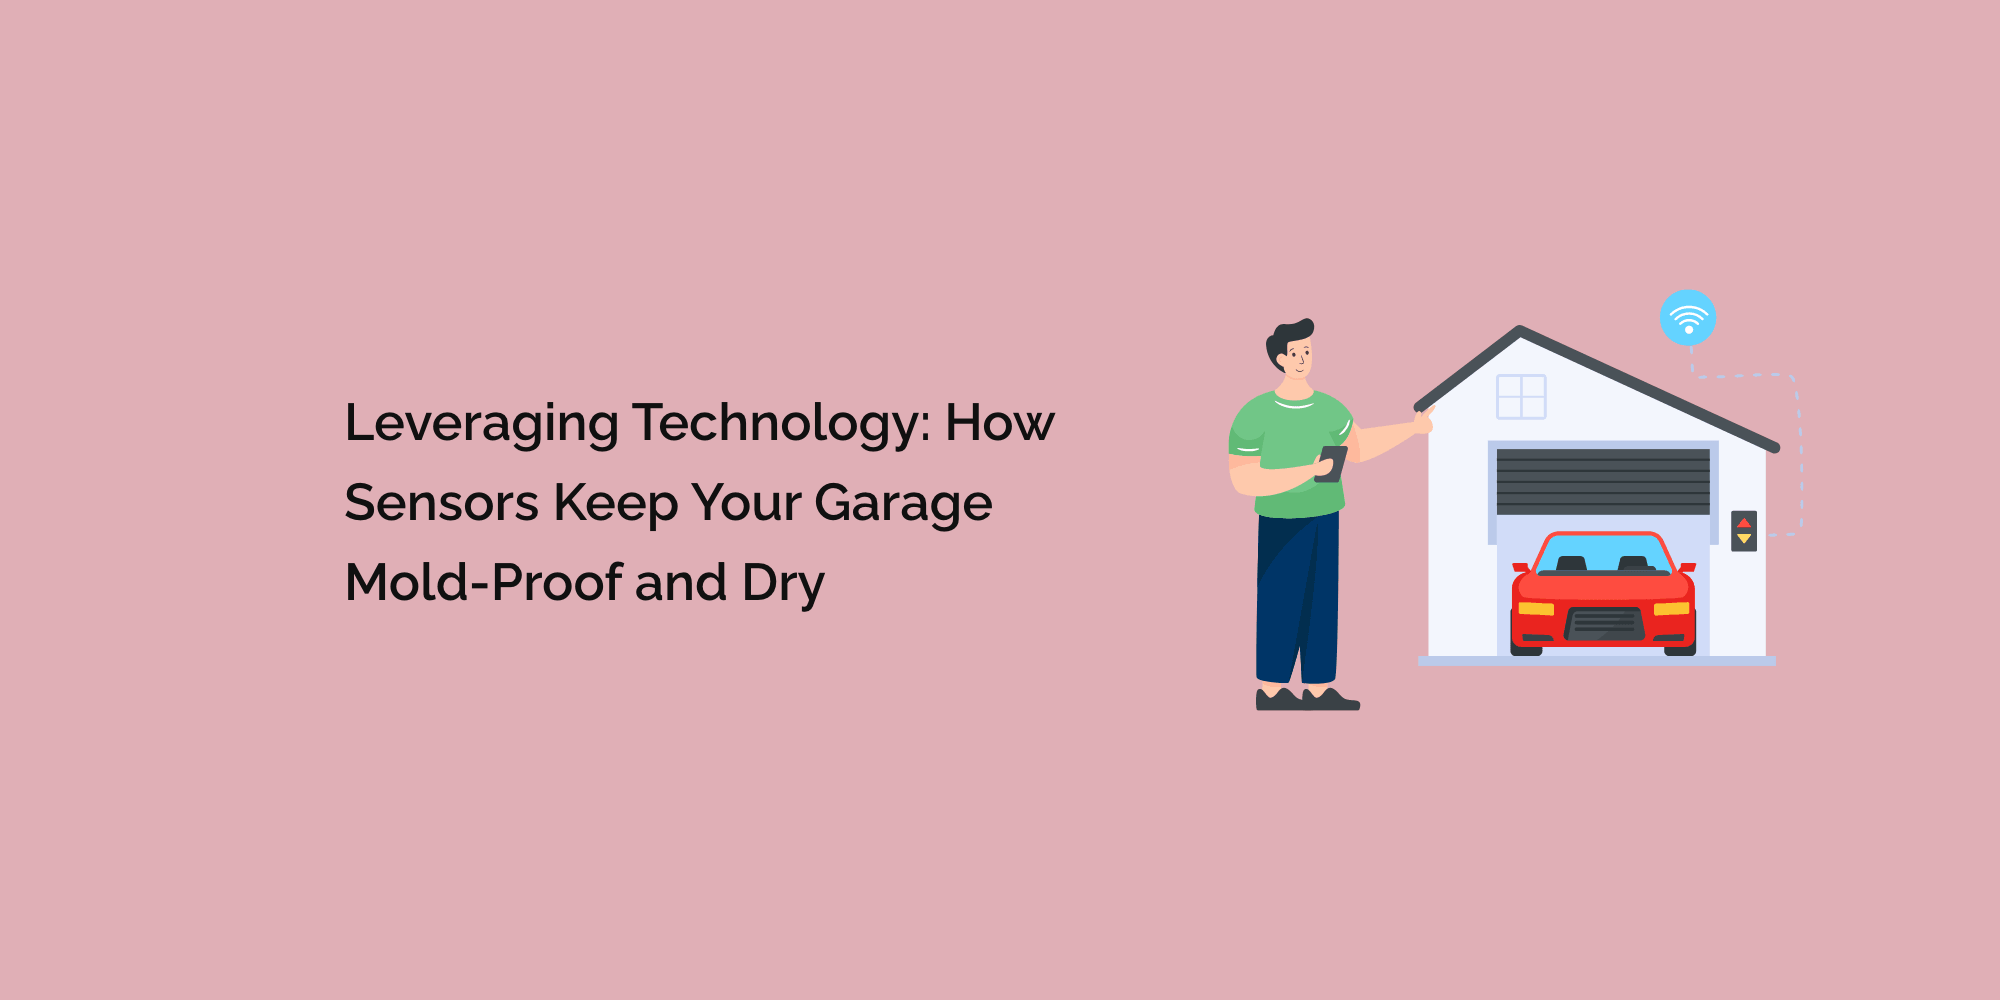 Leveraging Technology: How Sensors Keep Your Garage Mold-Proof and Dry